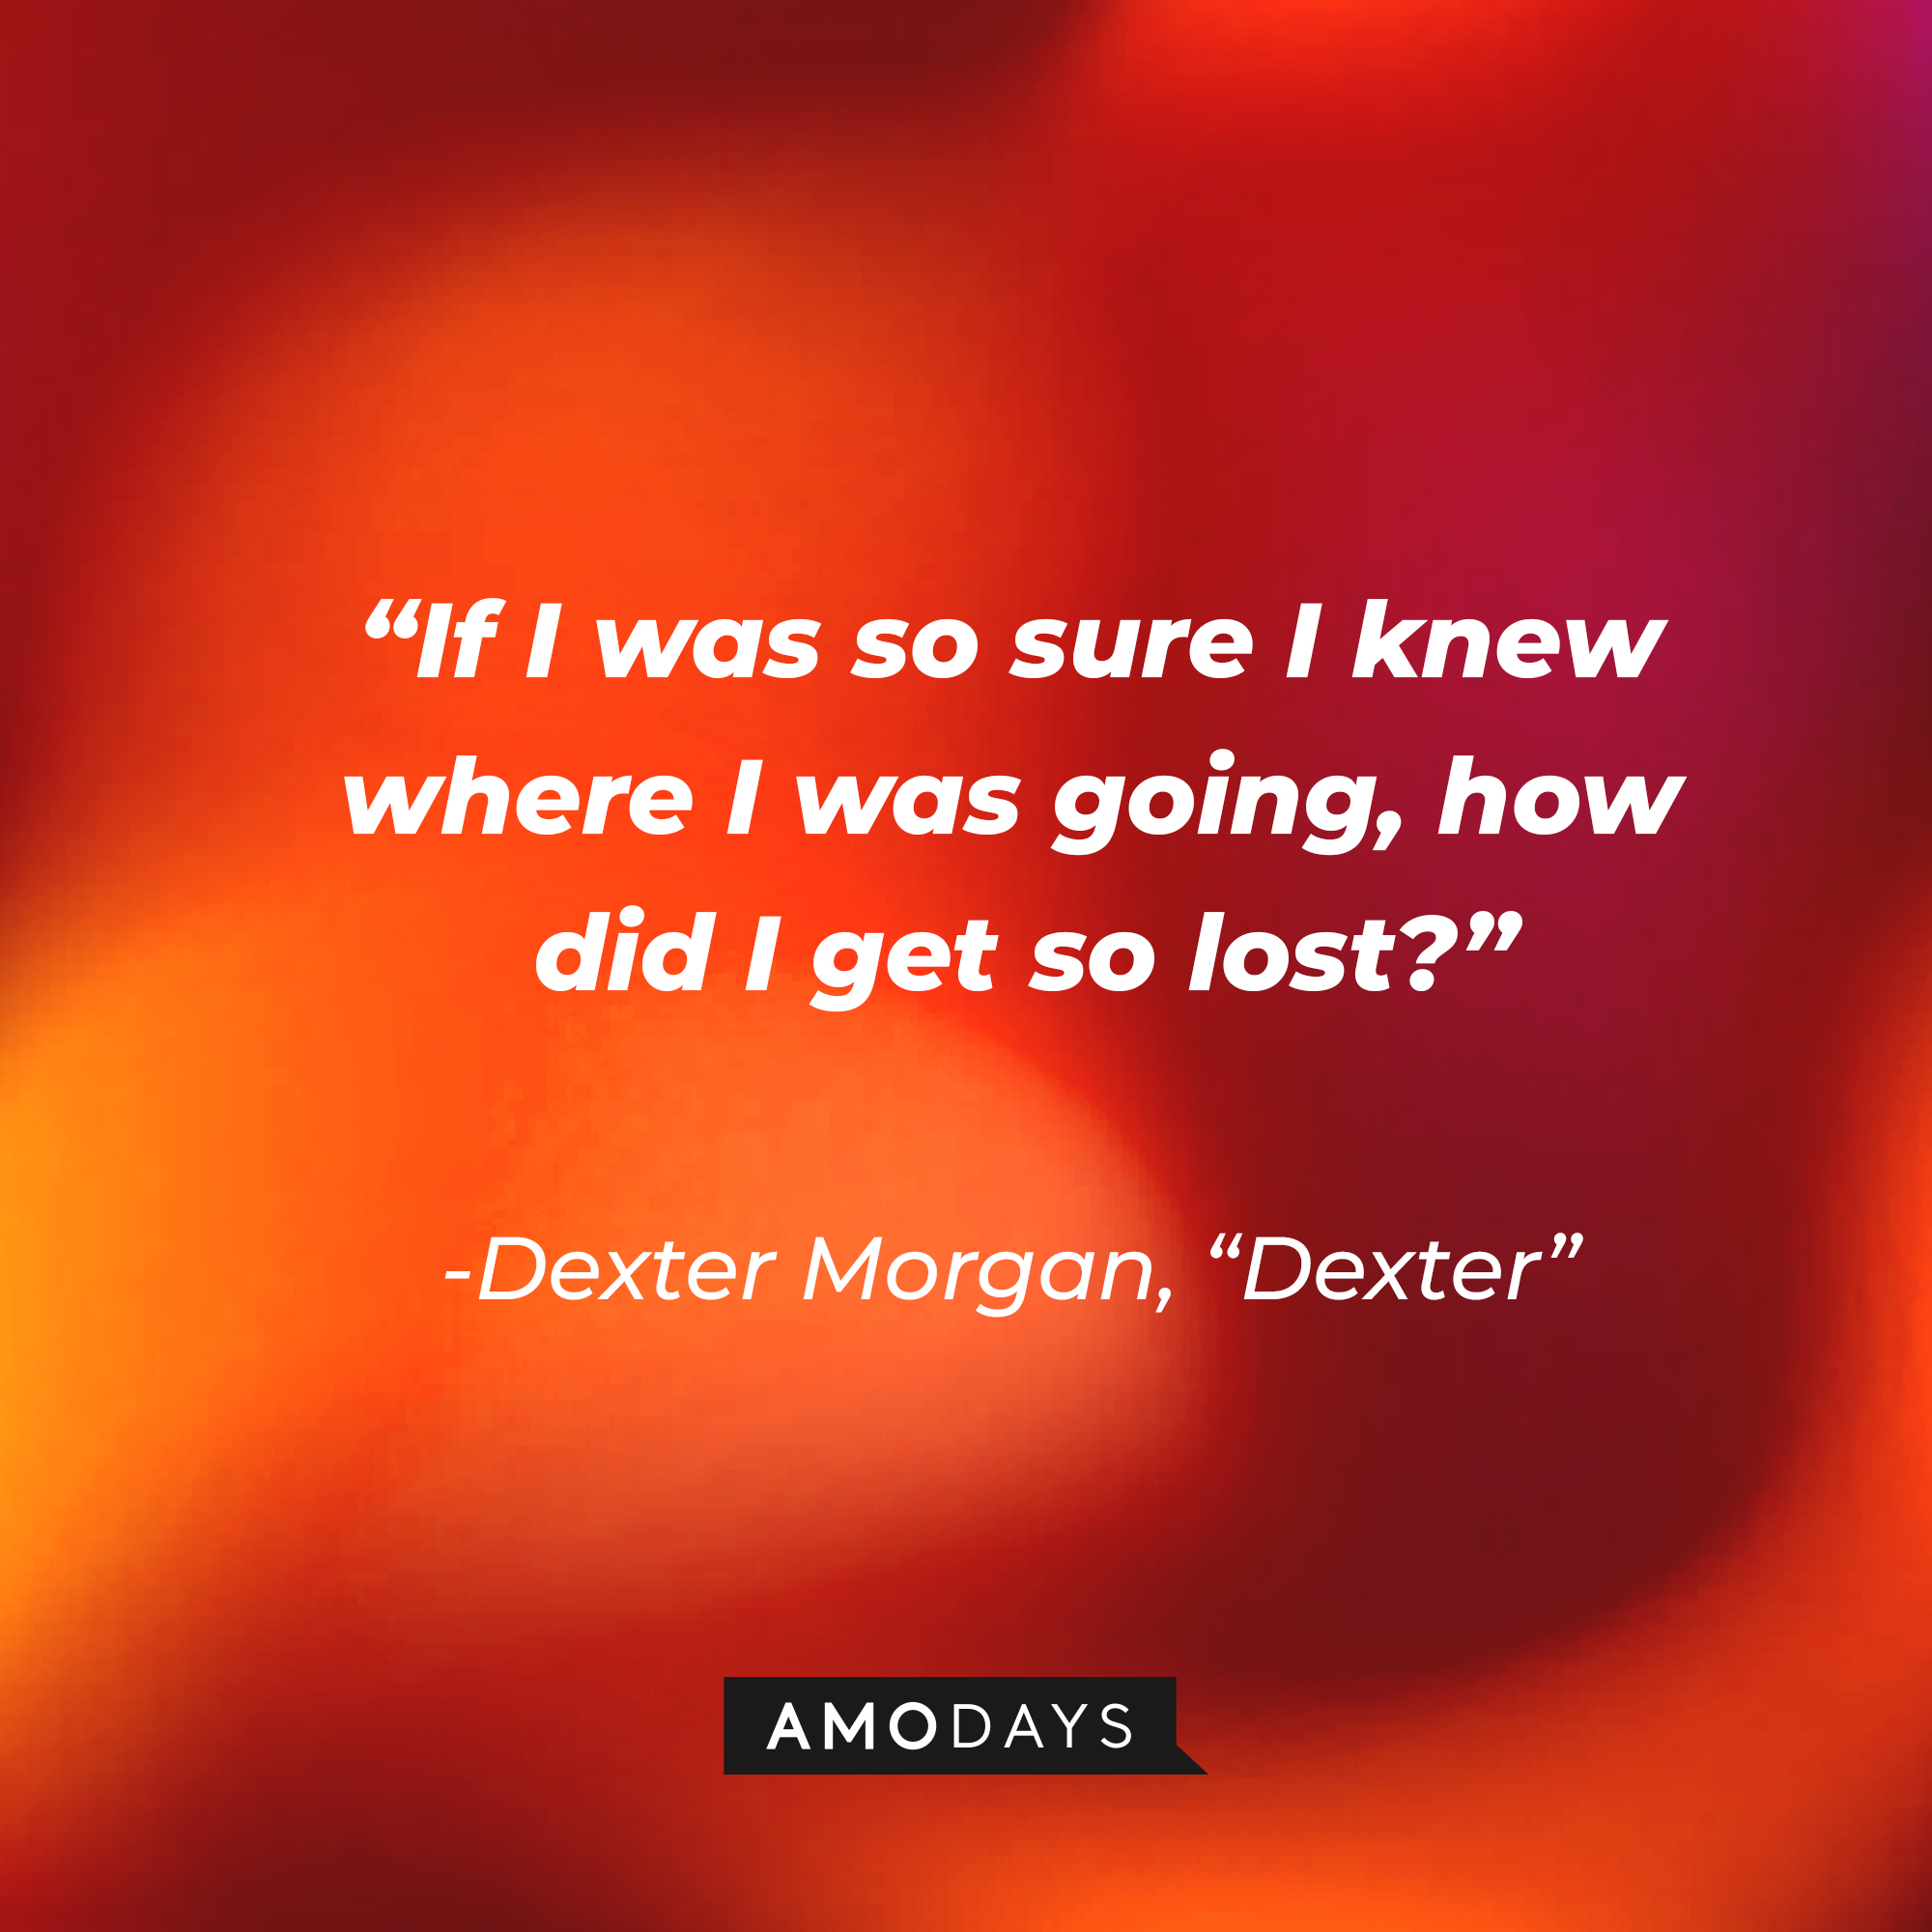 Dexter Morgan's quote from "Dexter:" "If I was so sure I knew where I was going, how did I get so lost?” | Source: AmoDays